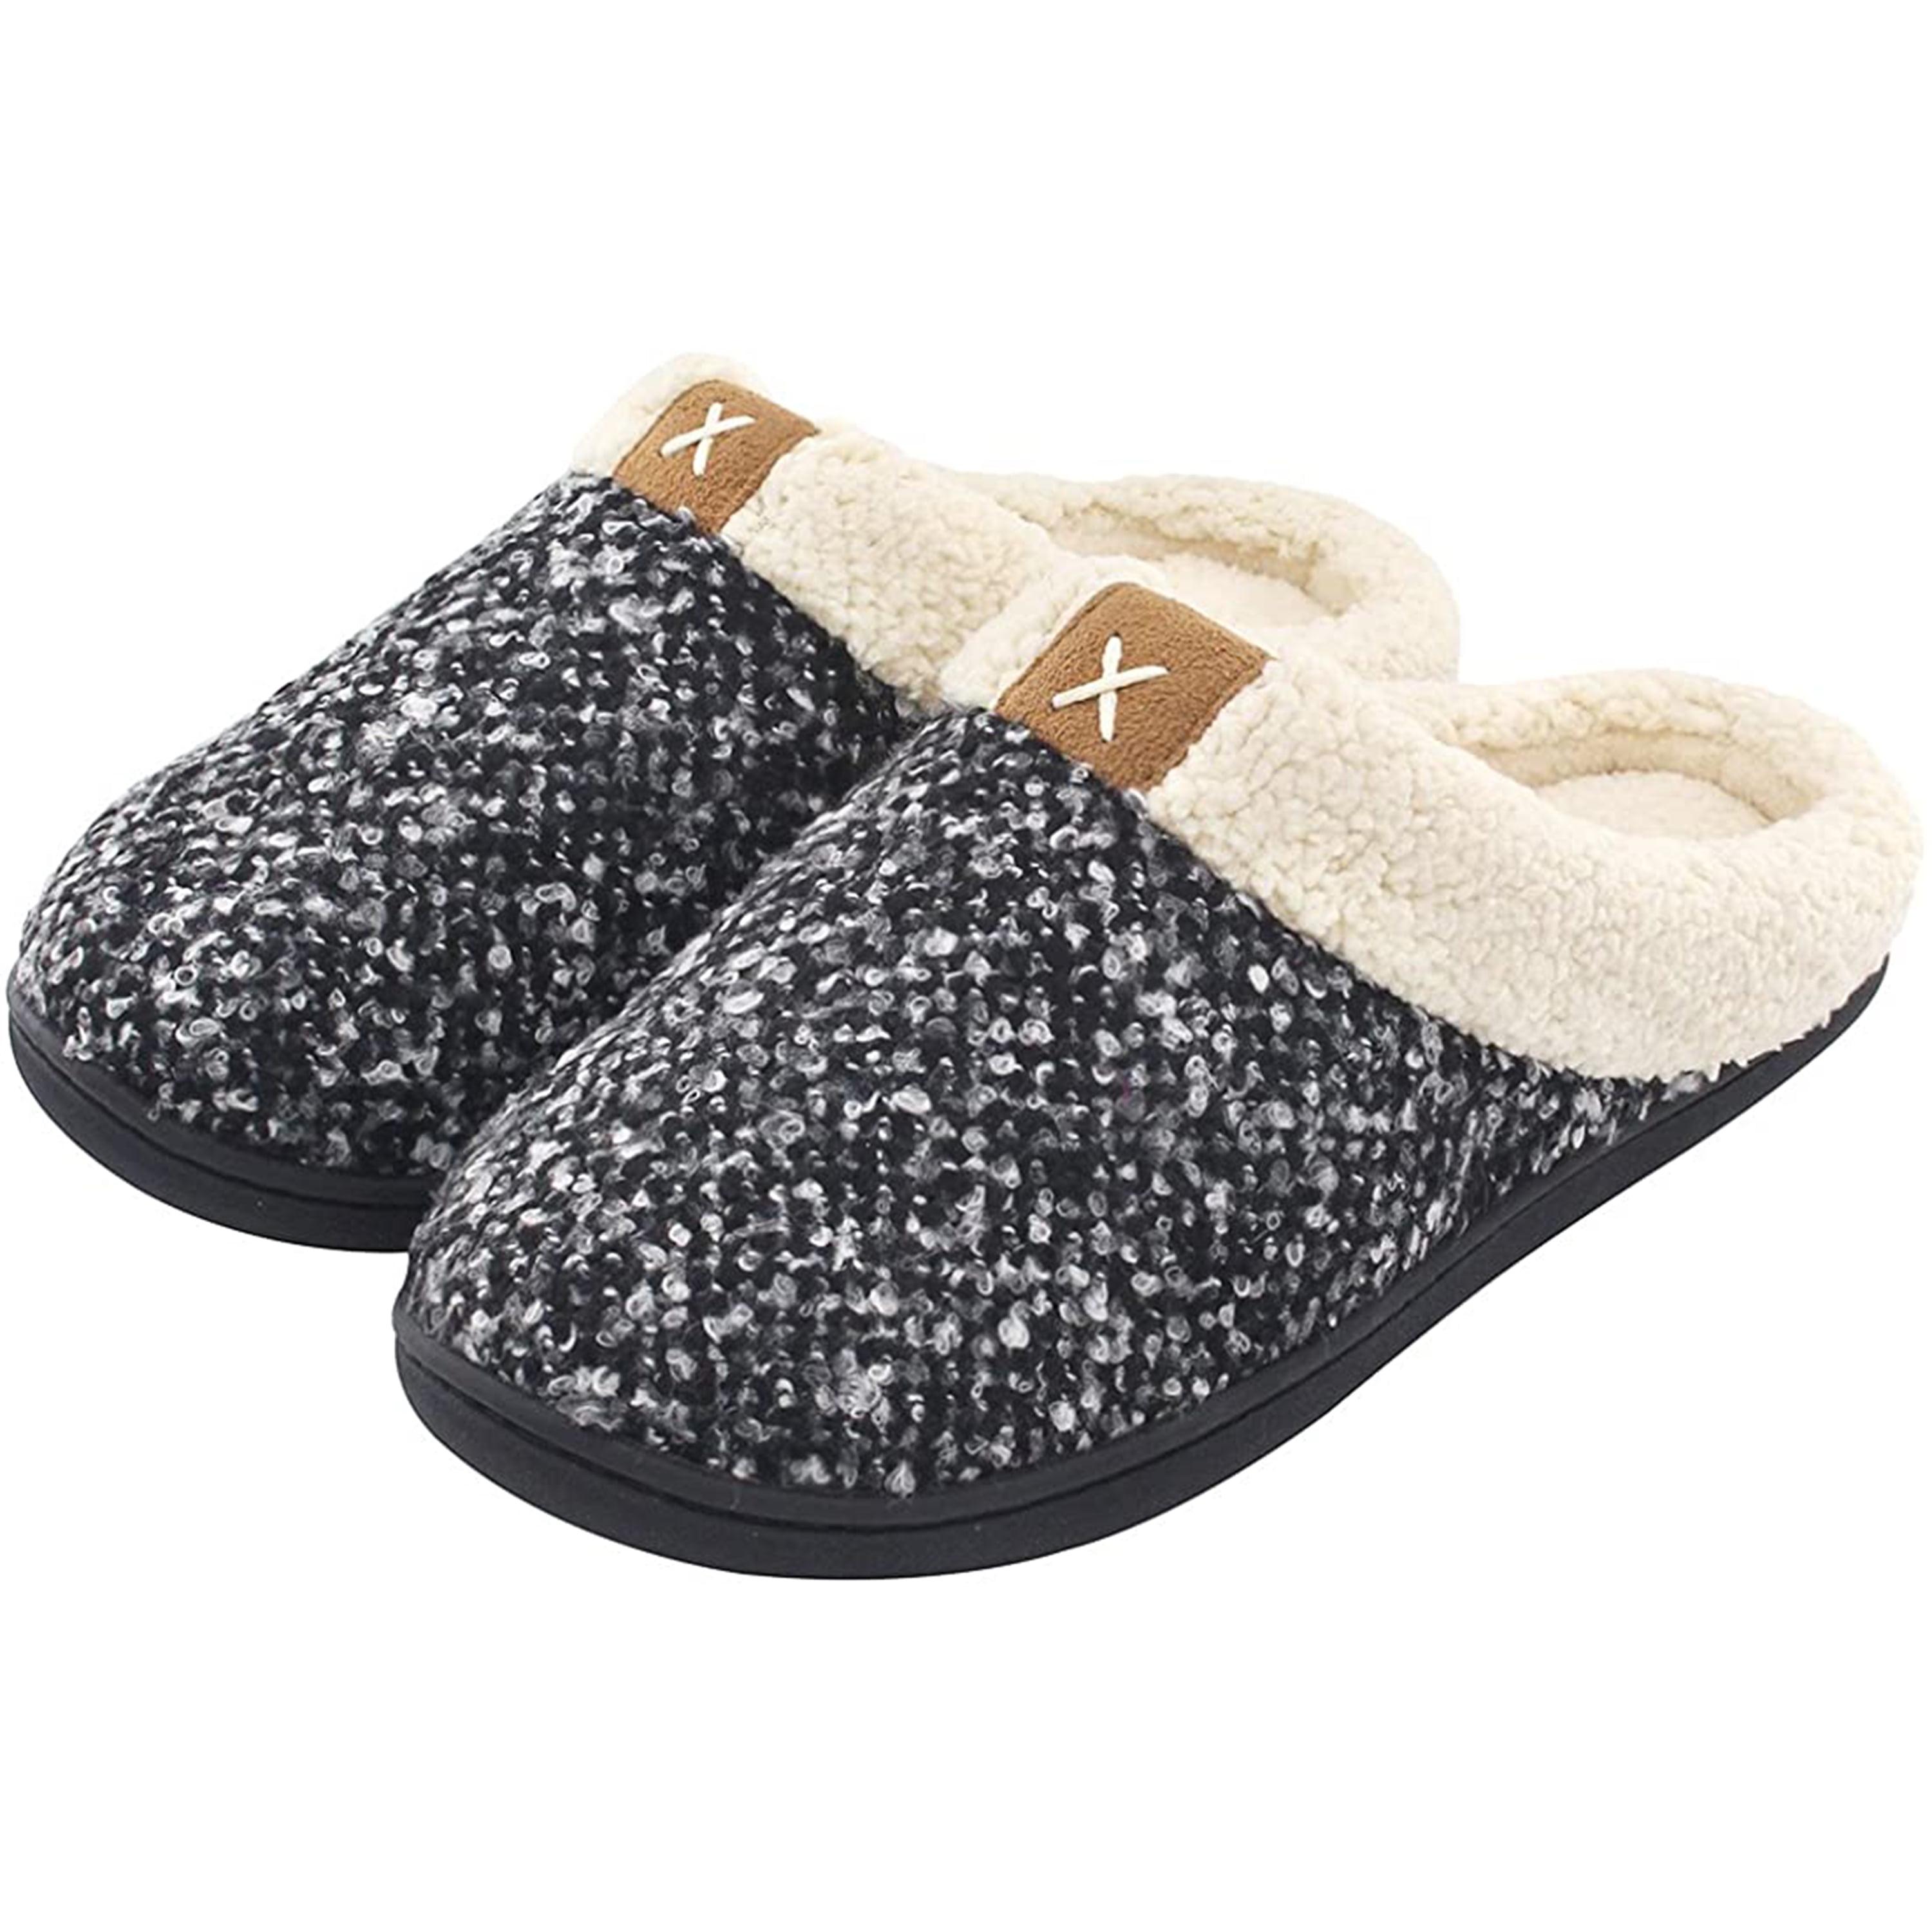 Womens Cozy Durable Slippers,Fuzzy Wool-Like Plush Fleece Lined House Shoes w/Indoor,Outdoor Anti-Skid Rubber Sole 